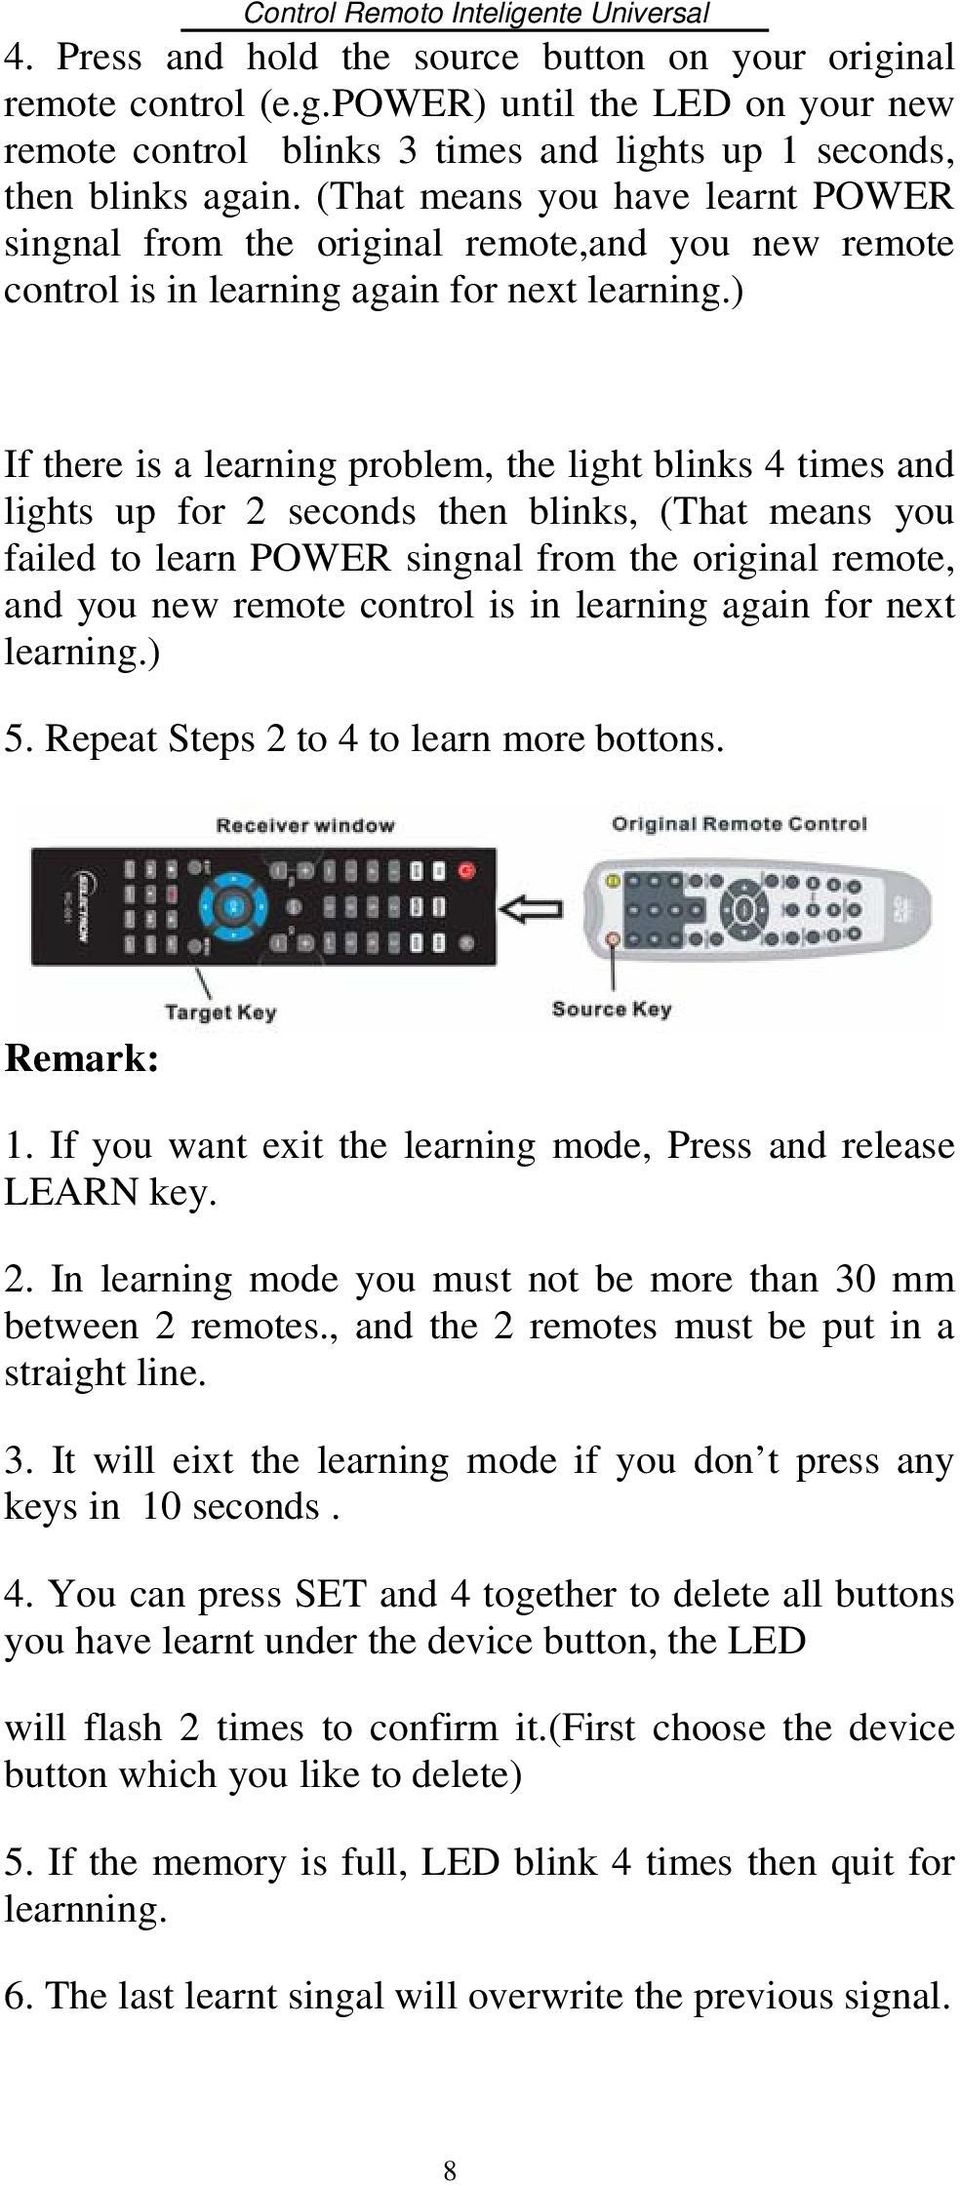 ) If there is a learning problem, the light blinks 4 times and lights up for 2 seconds then blinks, (That means you failed to learn POWER singnal from the original remote, and you new remote control